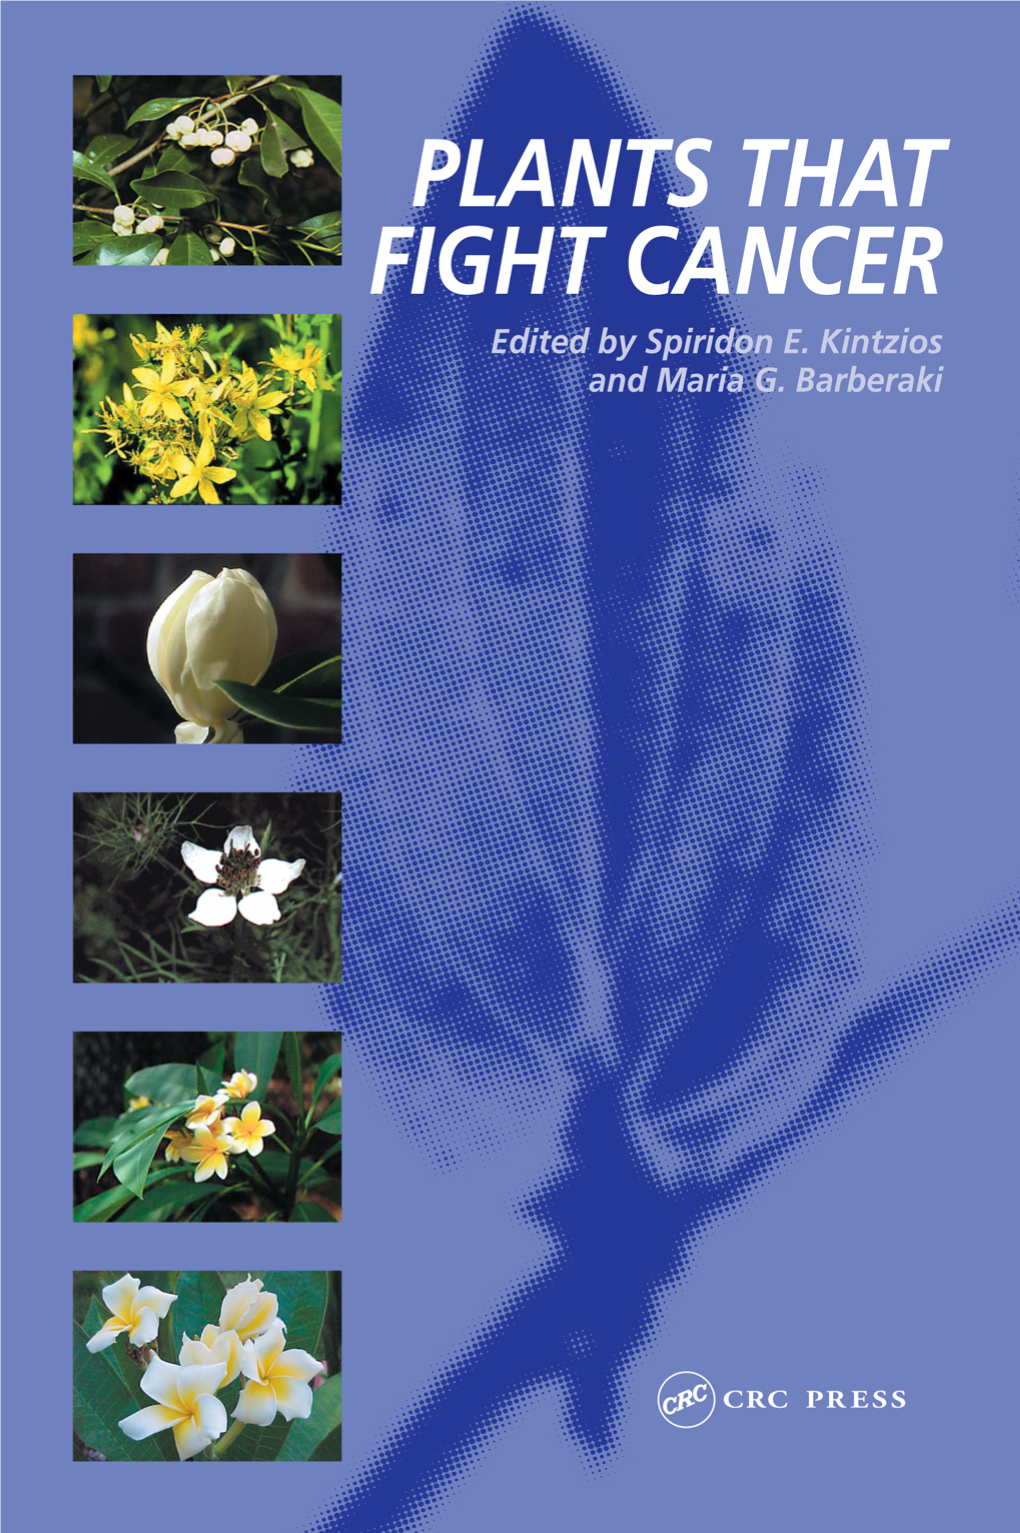 PLANTS THAT FIGHT CANCER Also Available from CRC Press